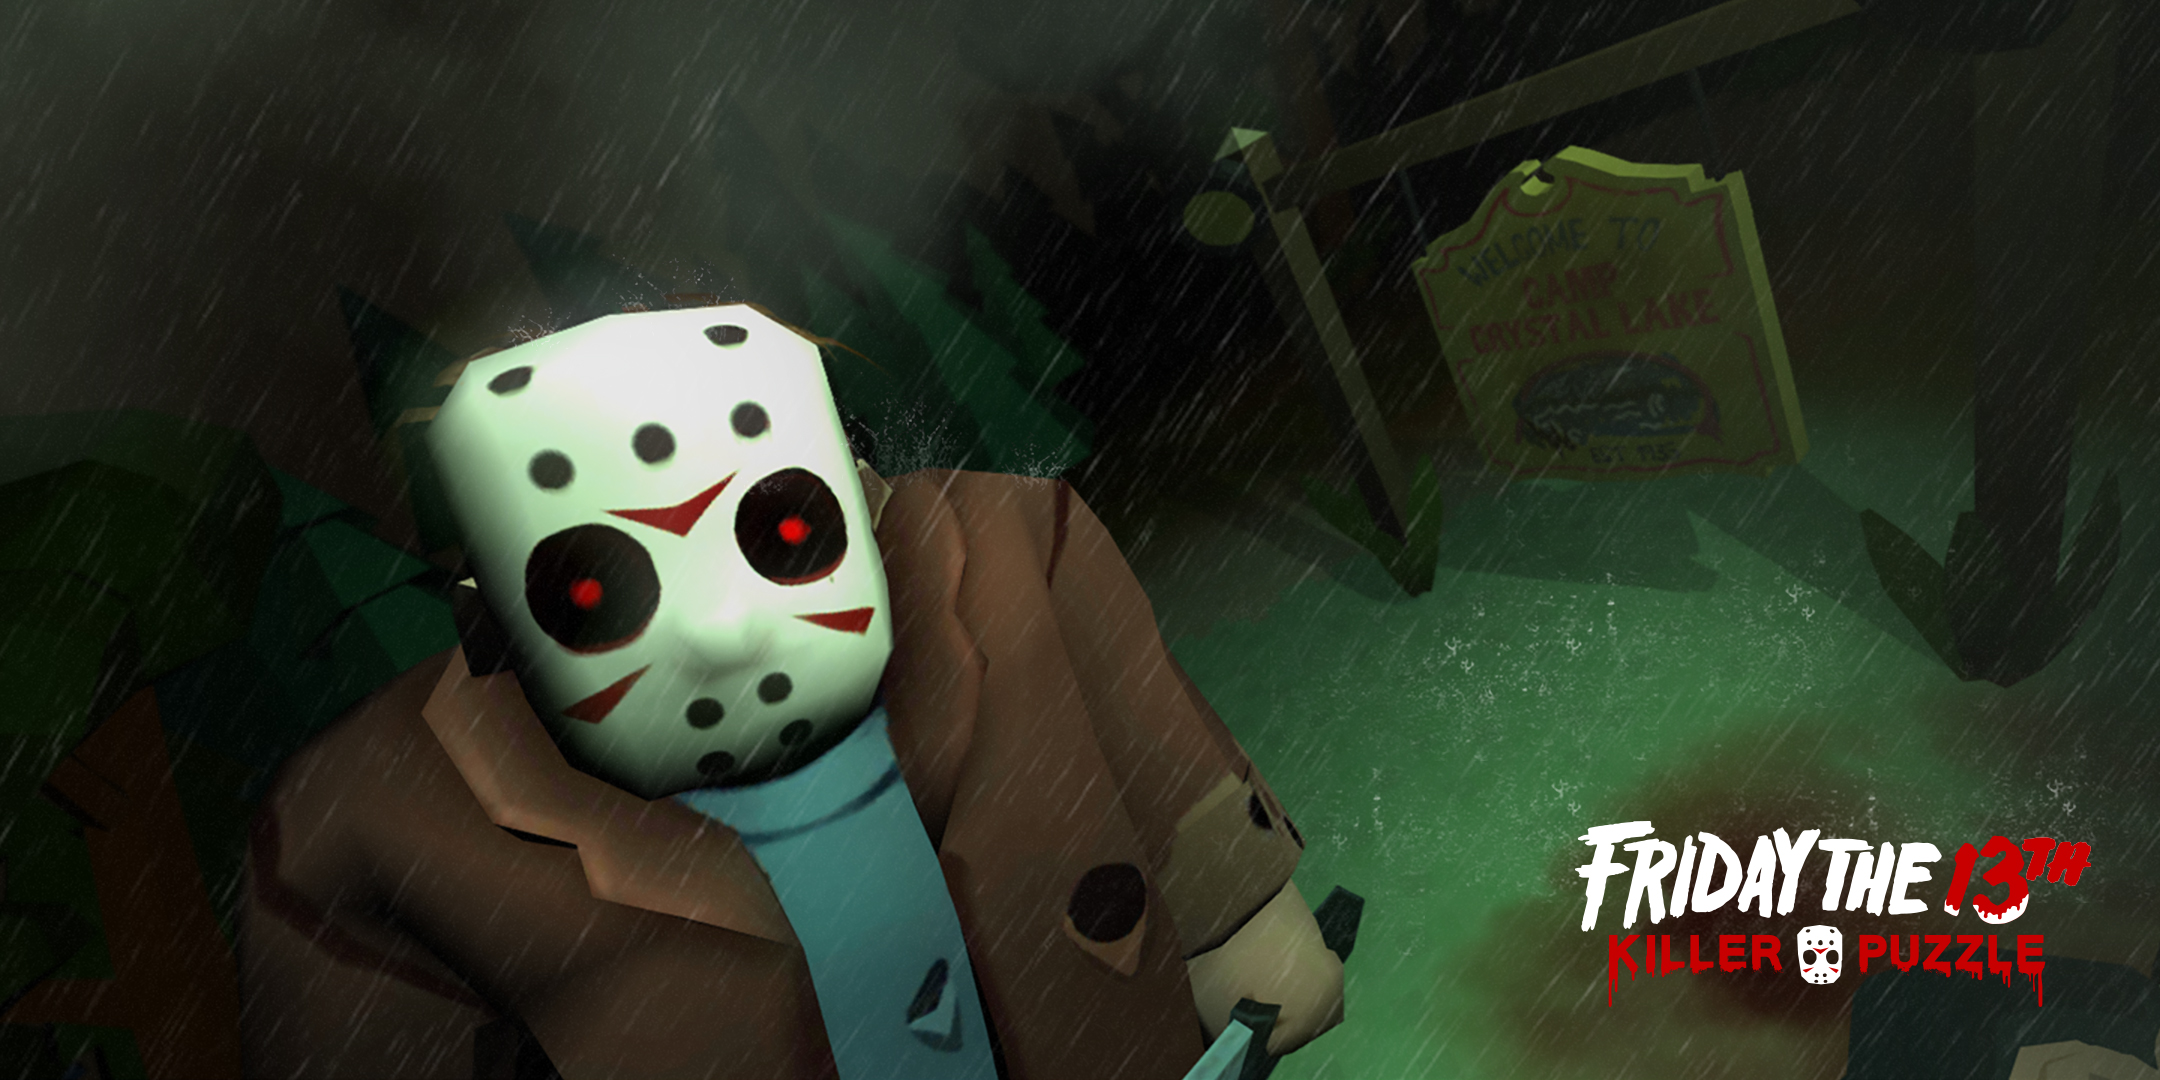 Friday the 13th: Killer Puzzle by Blue Wizard Digital LP